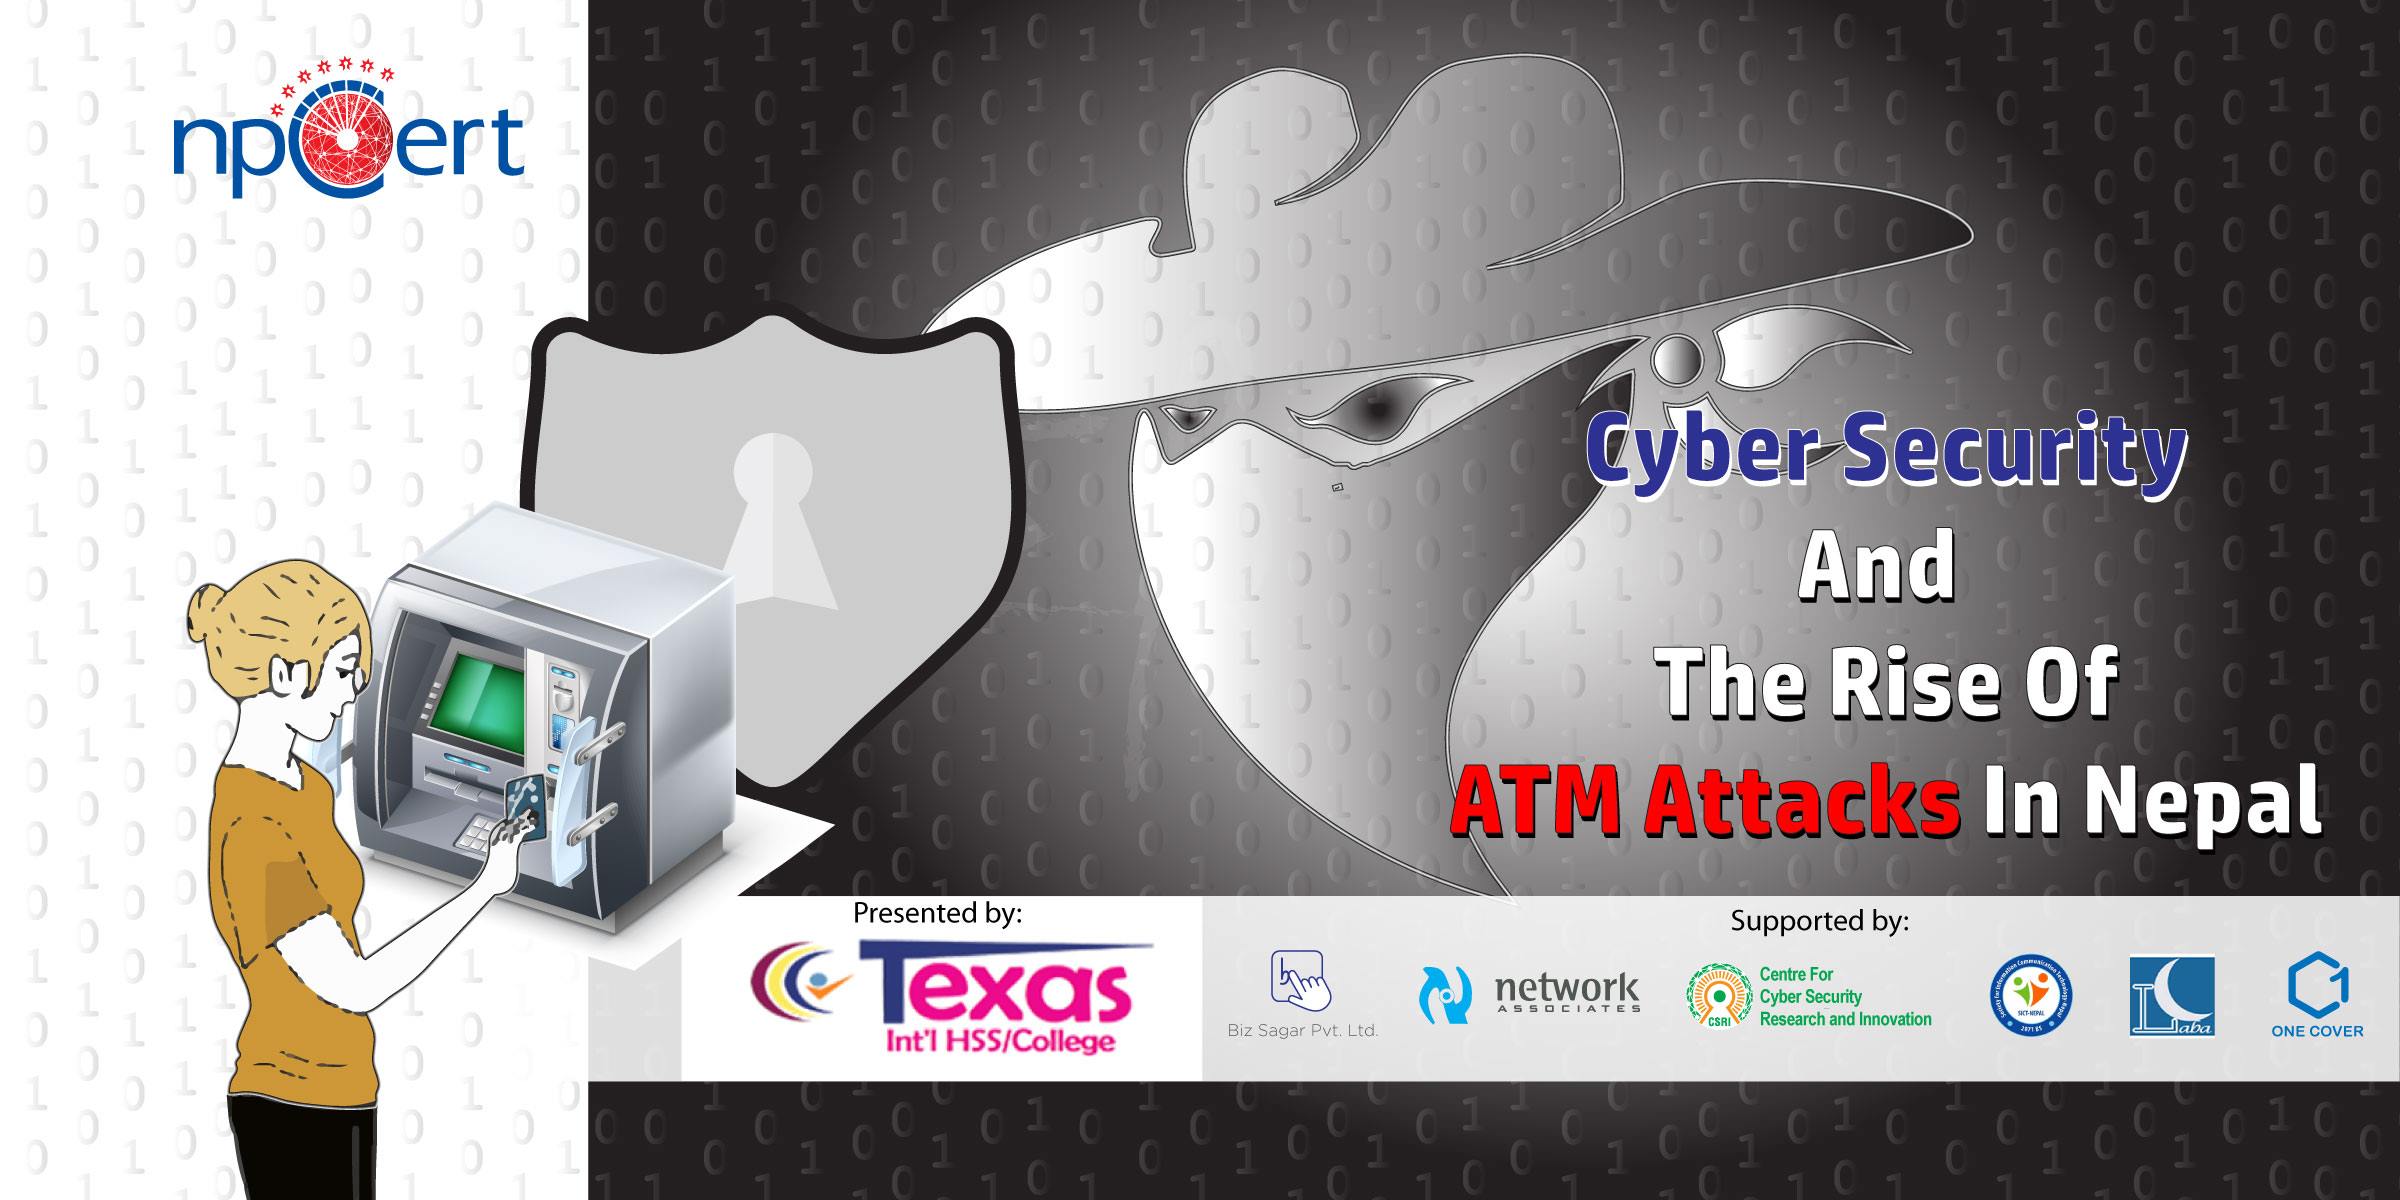 Information Security And The Rise Of ATM Attacks In Nepal